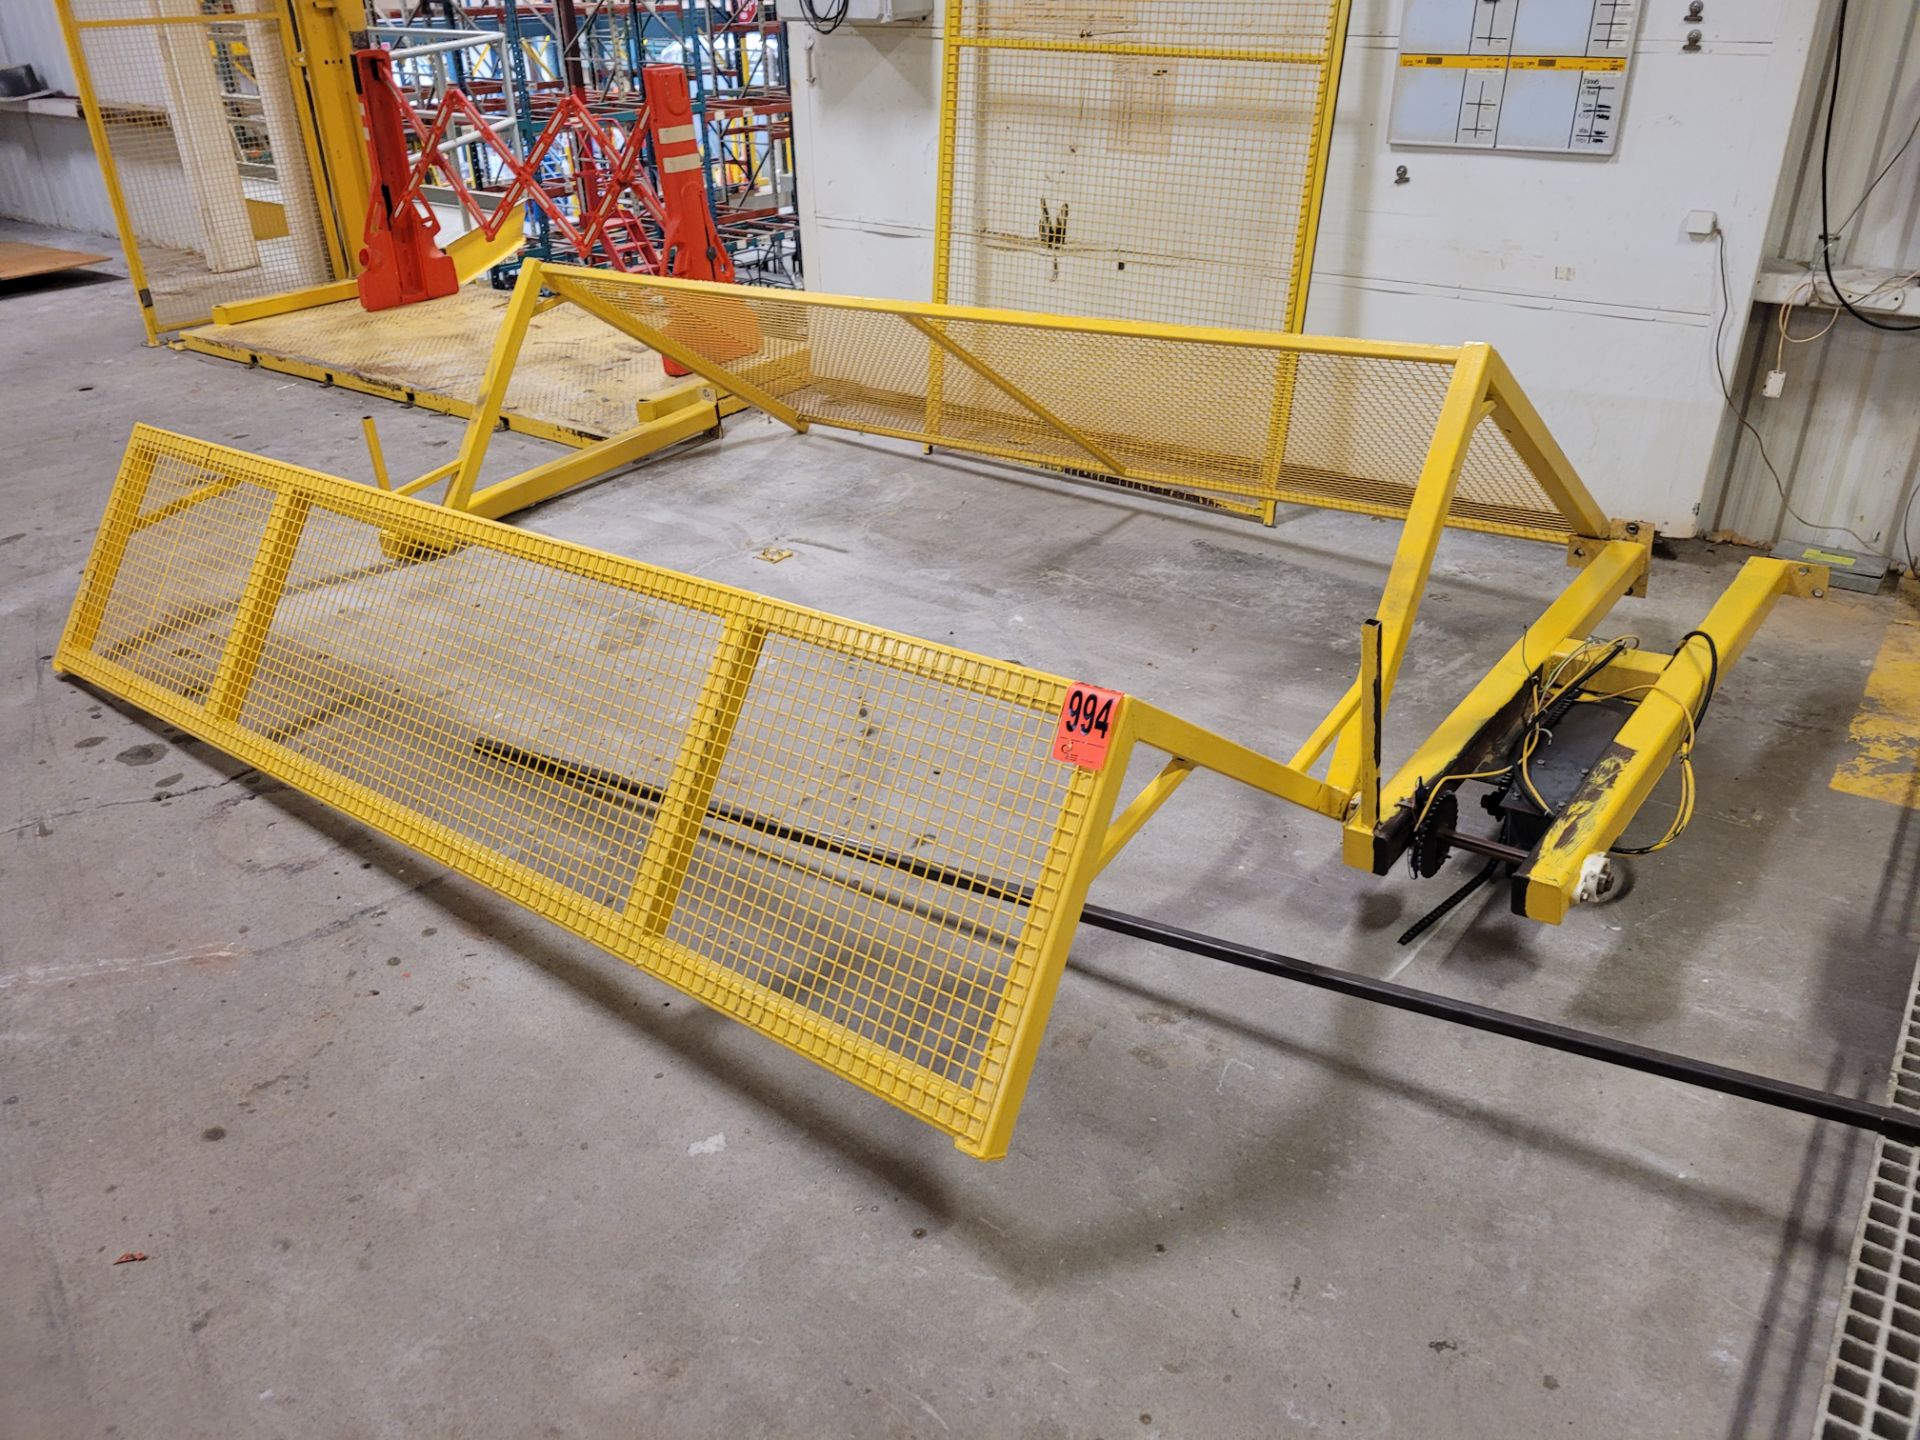 Automatic safety gate enclosure - partially dismantled for tank removal on mezzanine